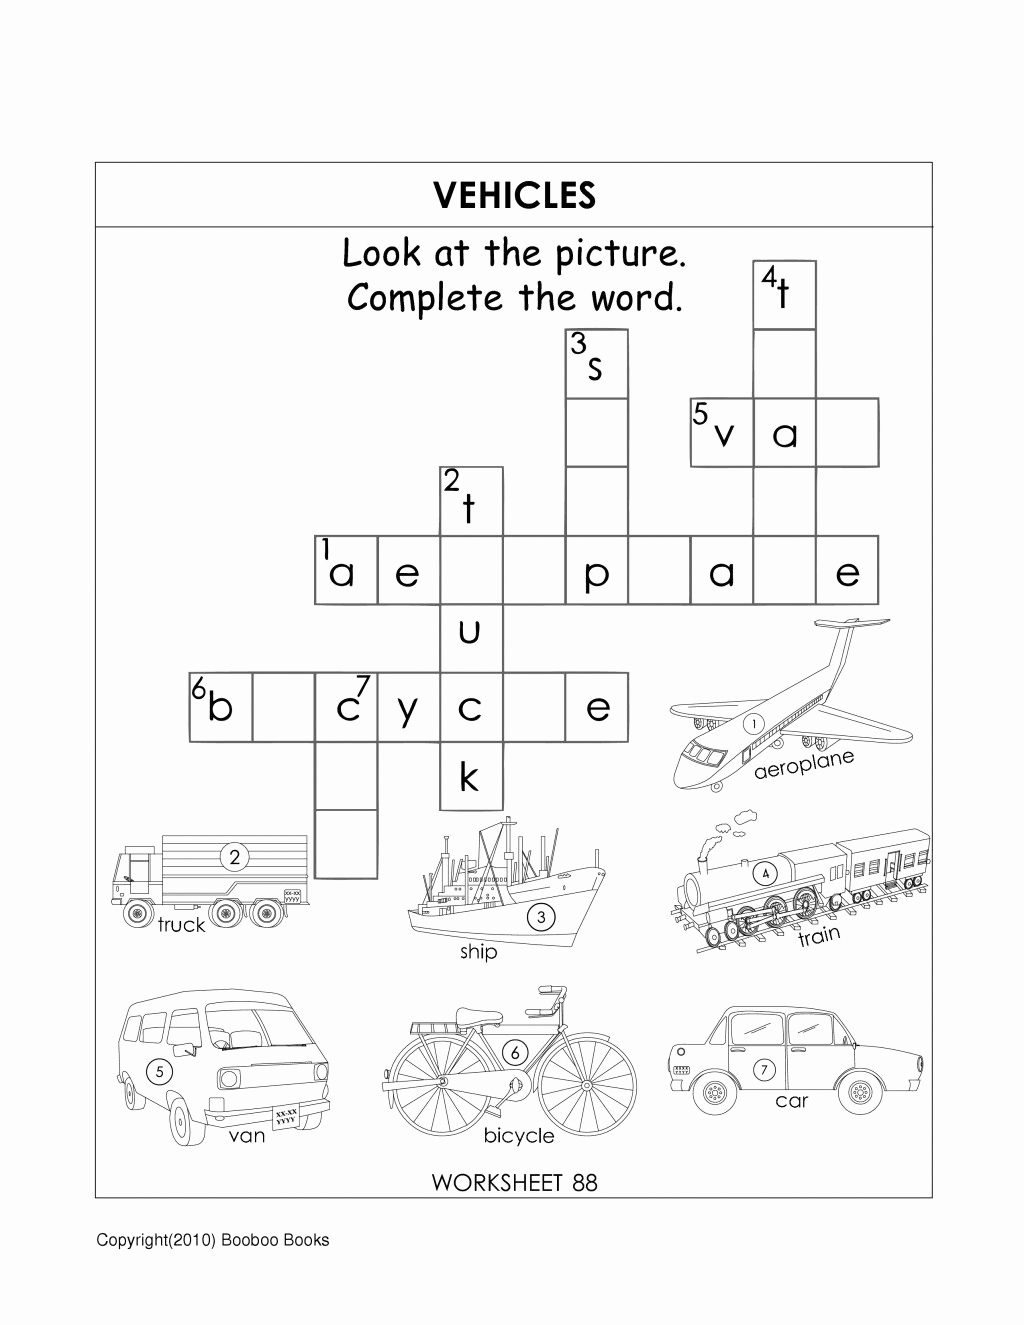 Computer Worksheets for Middle School Lovely 20 Puter Worksheets for Middle School